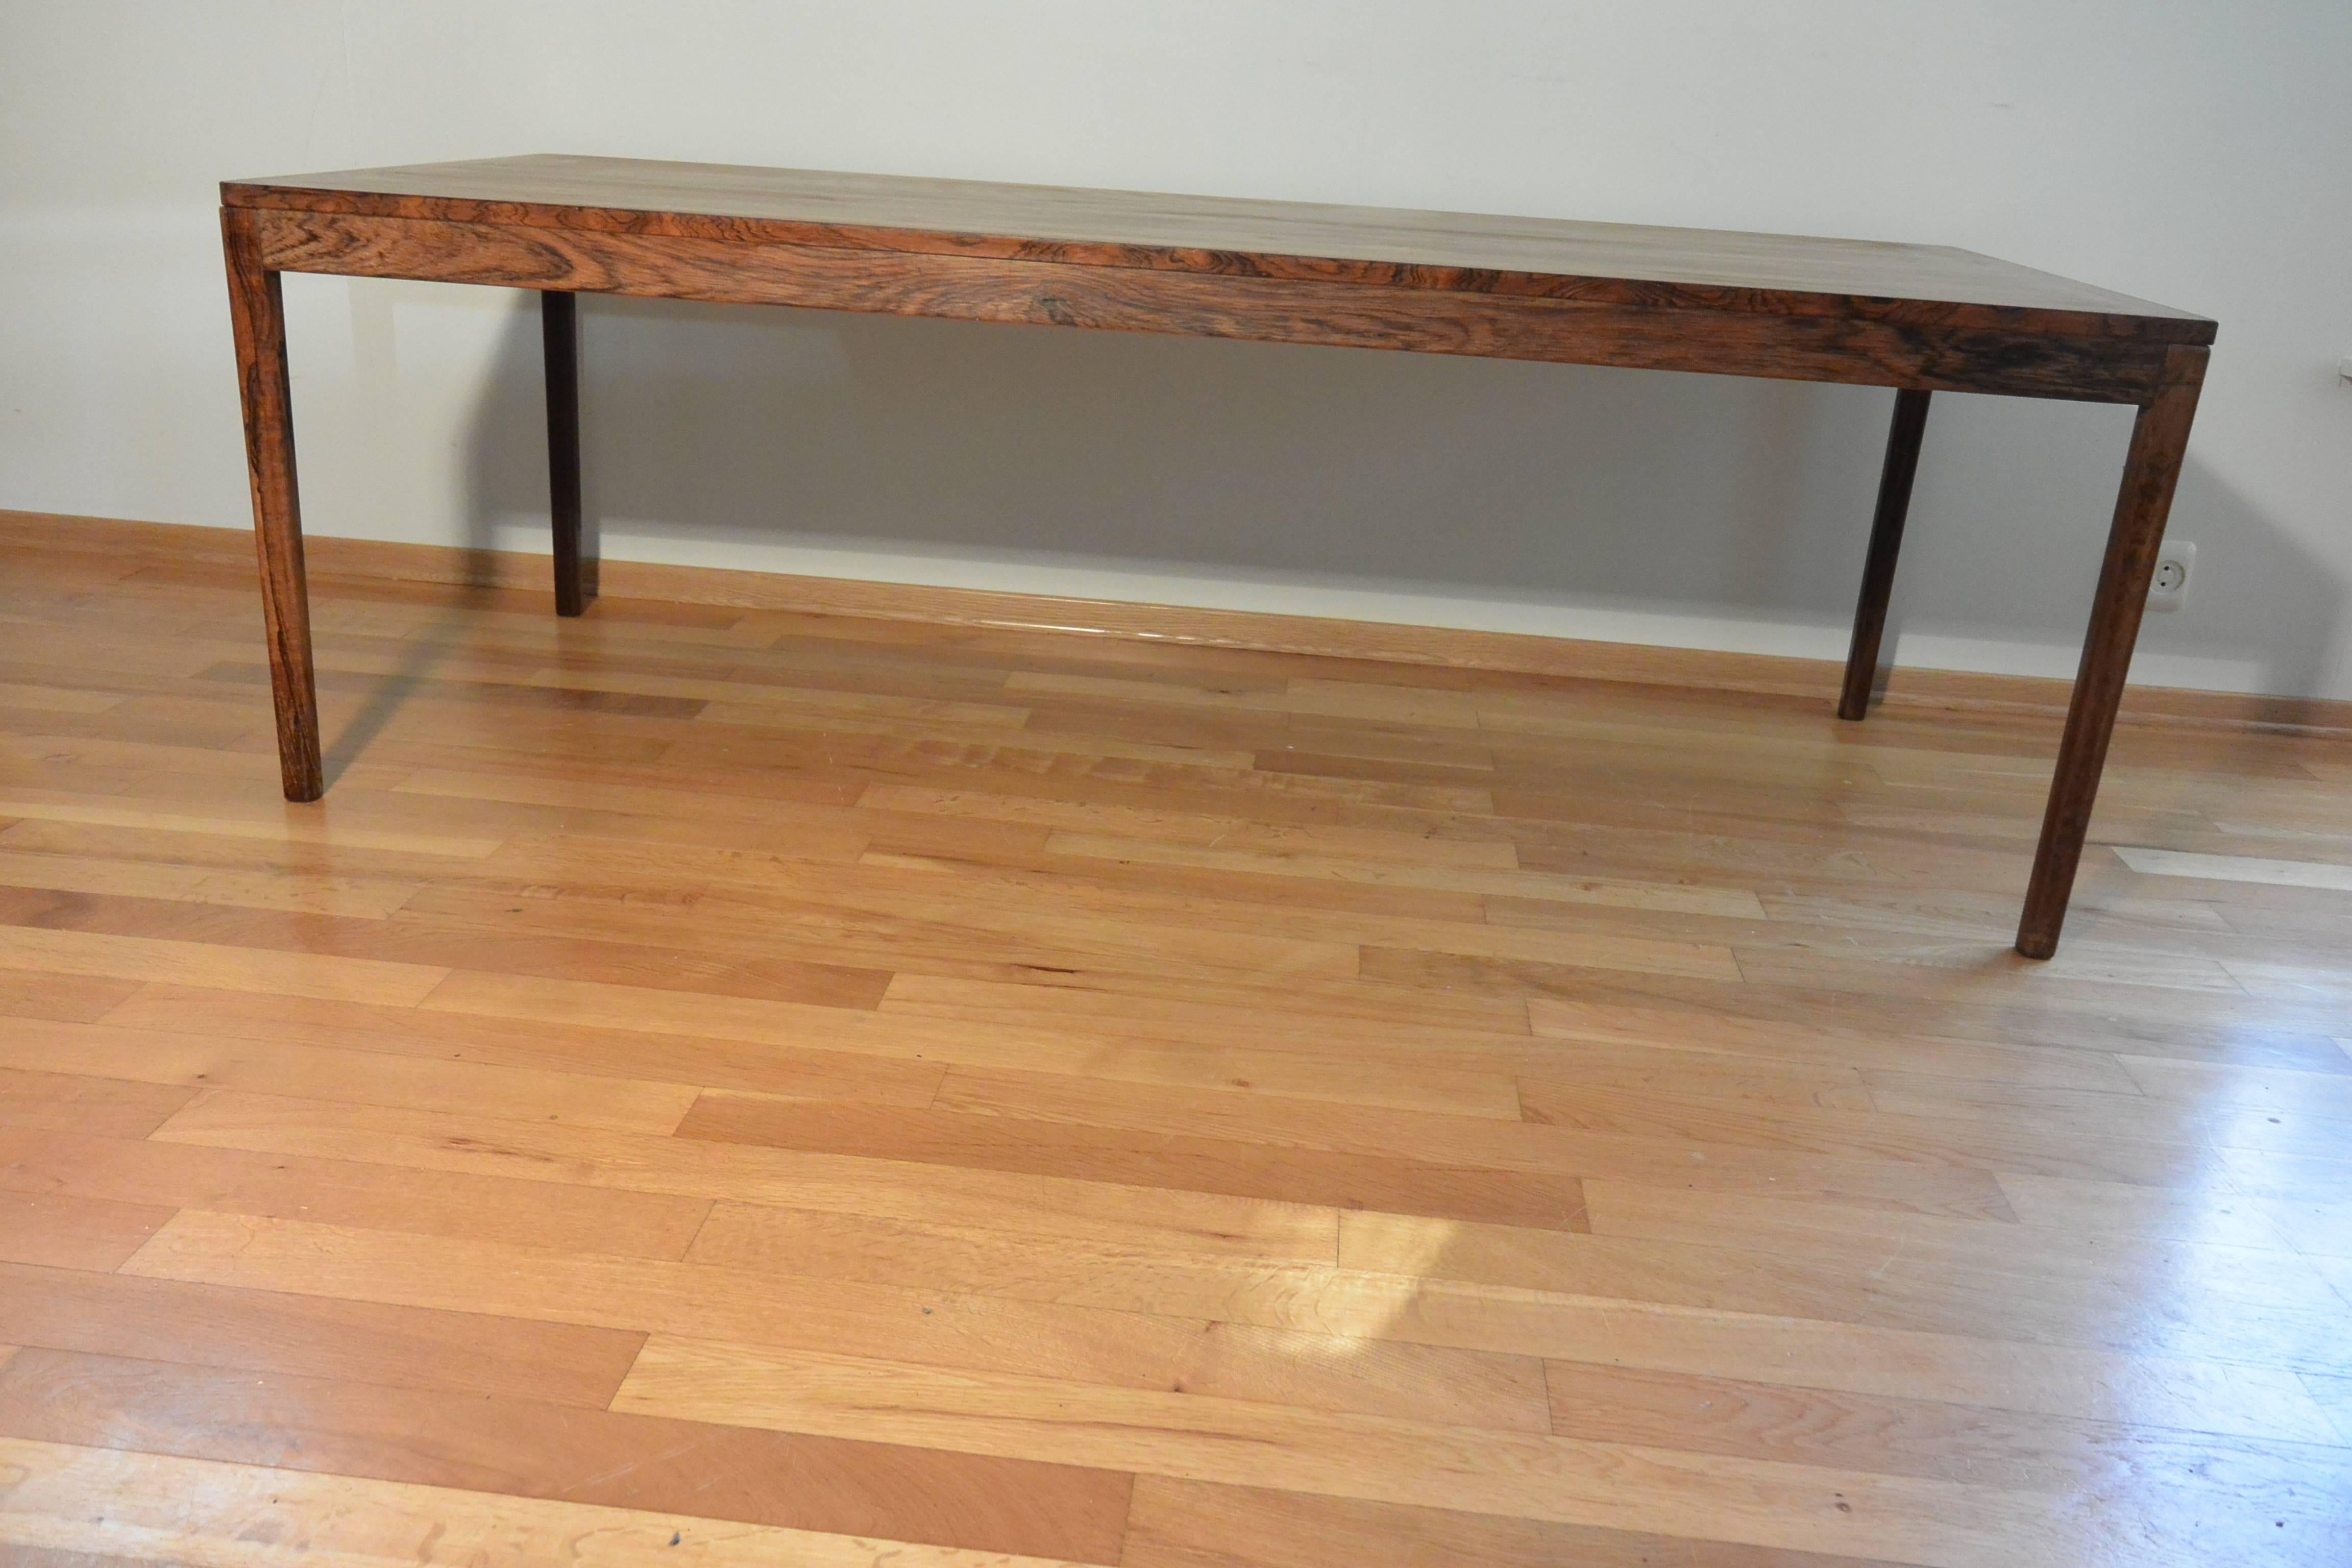 Hand-Crafted Rosewood Coffee Table, Scandinavian Design 1960s For Sale